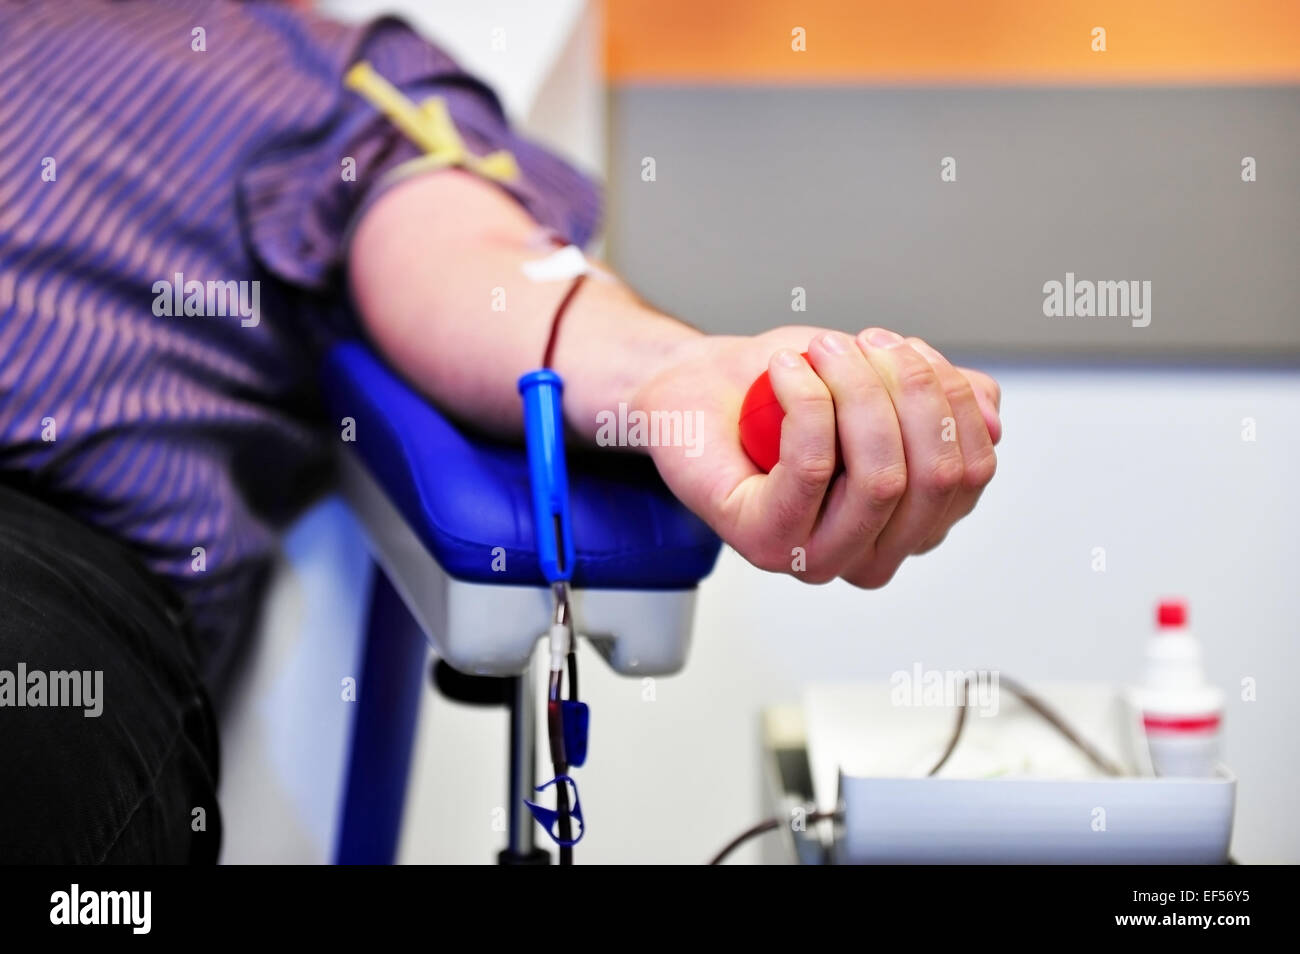 The hand of a blood donor squeezing a medical rubber ball Stock Photo